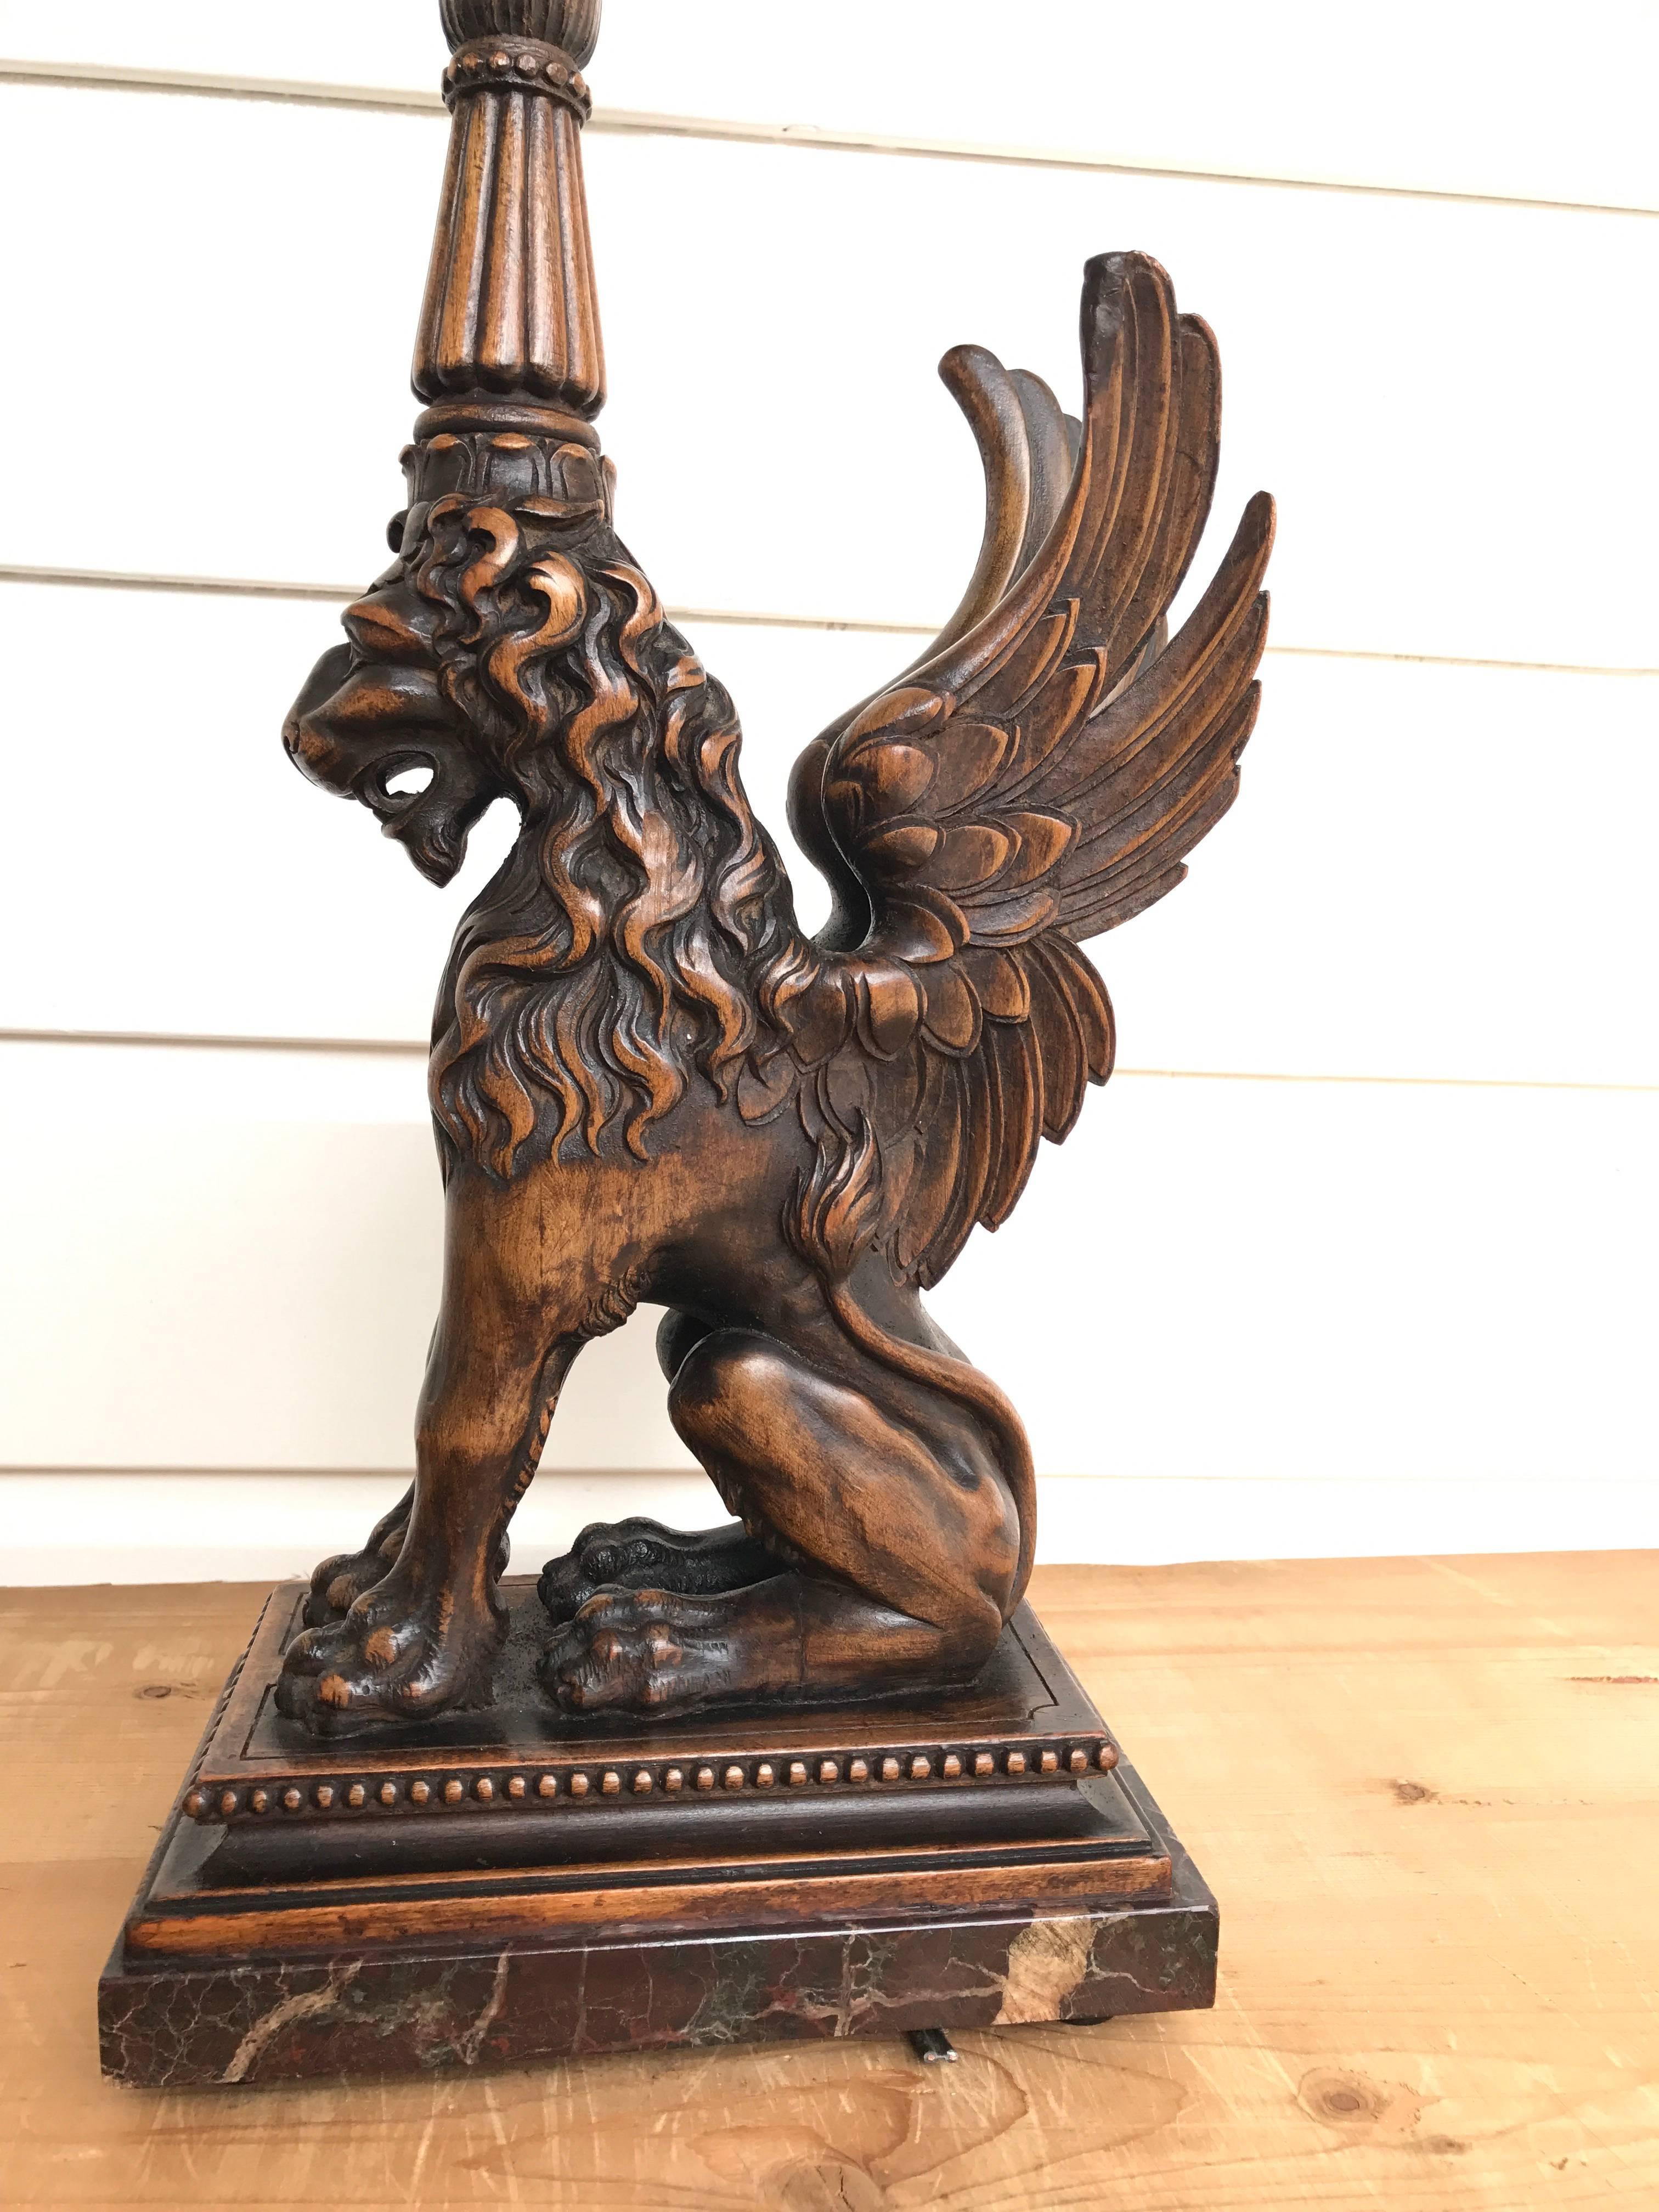 Decorative and highly stylish antique table lamp on a marble base. 

This rare and impressive lion sculpture is beautifully carved out of one piece of nutwood. It is sitting up in a stately manor and his angelic wings make him extra impressive. This